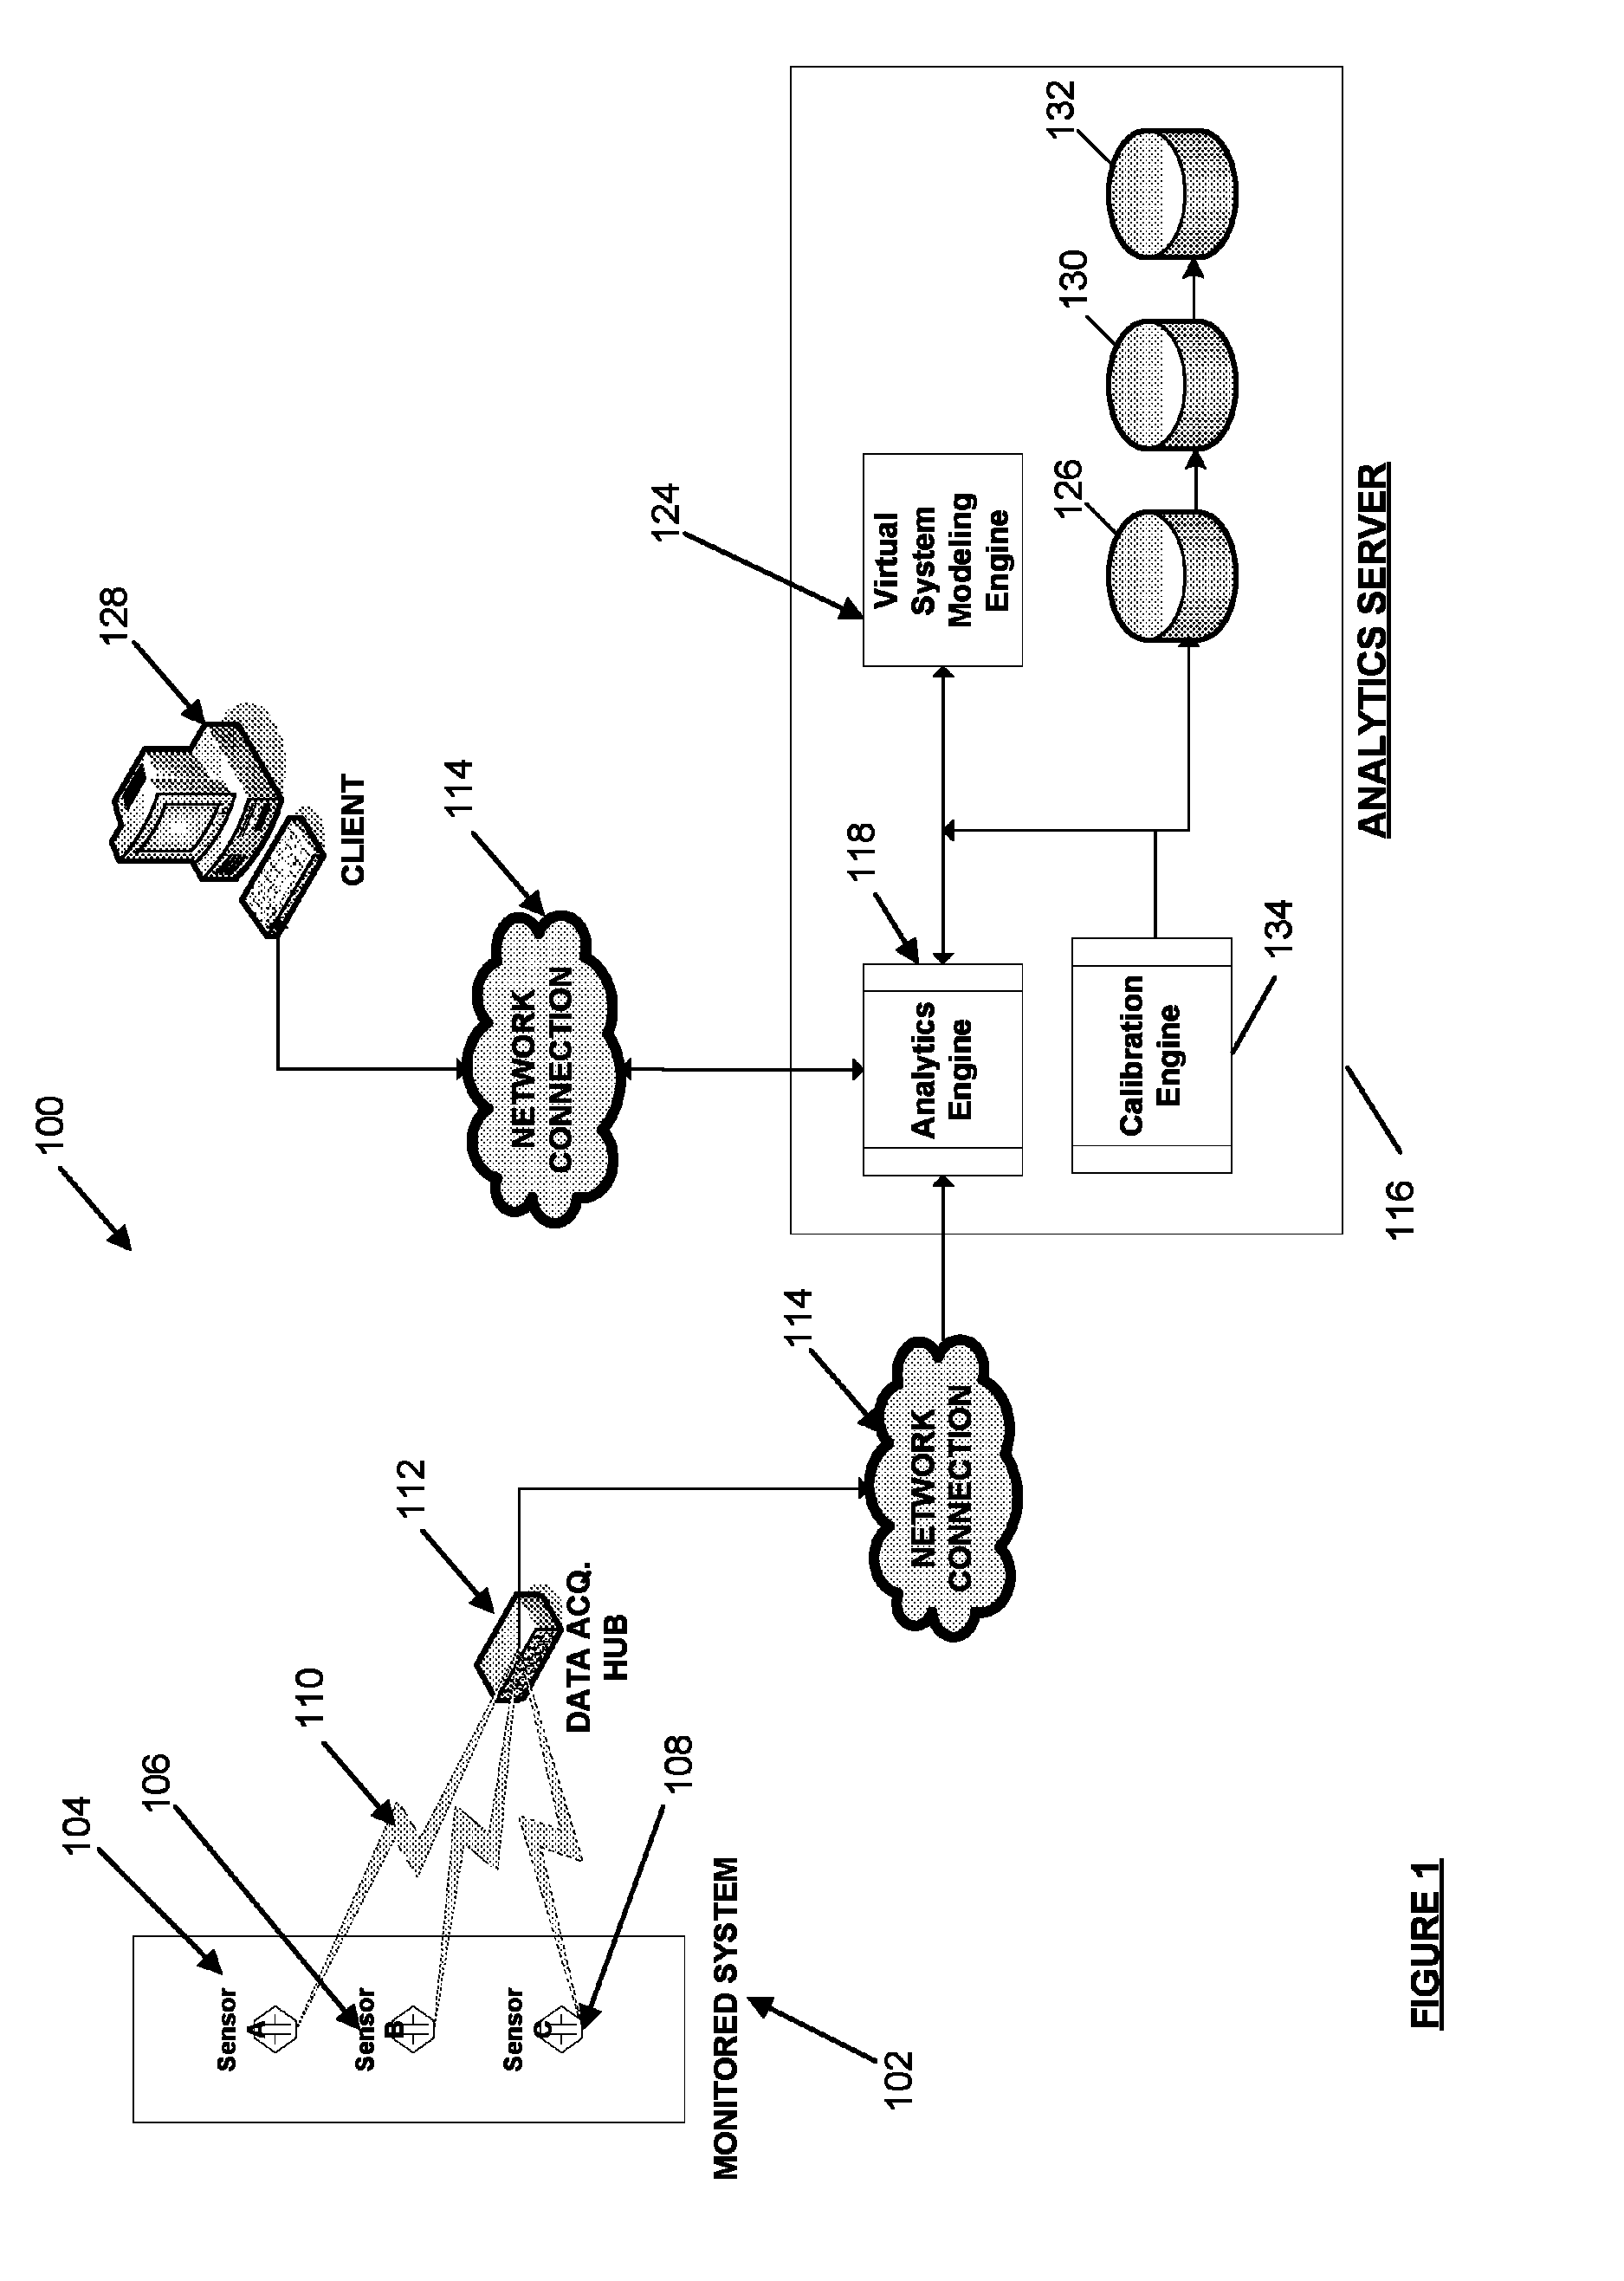 Systems and methods for a real-time synchronized electrical power system simulator for “what-if” analysis and prediction over electrical power networks